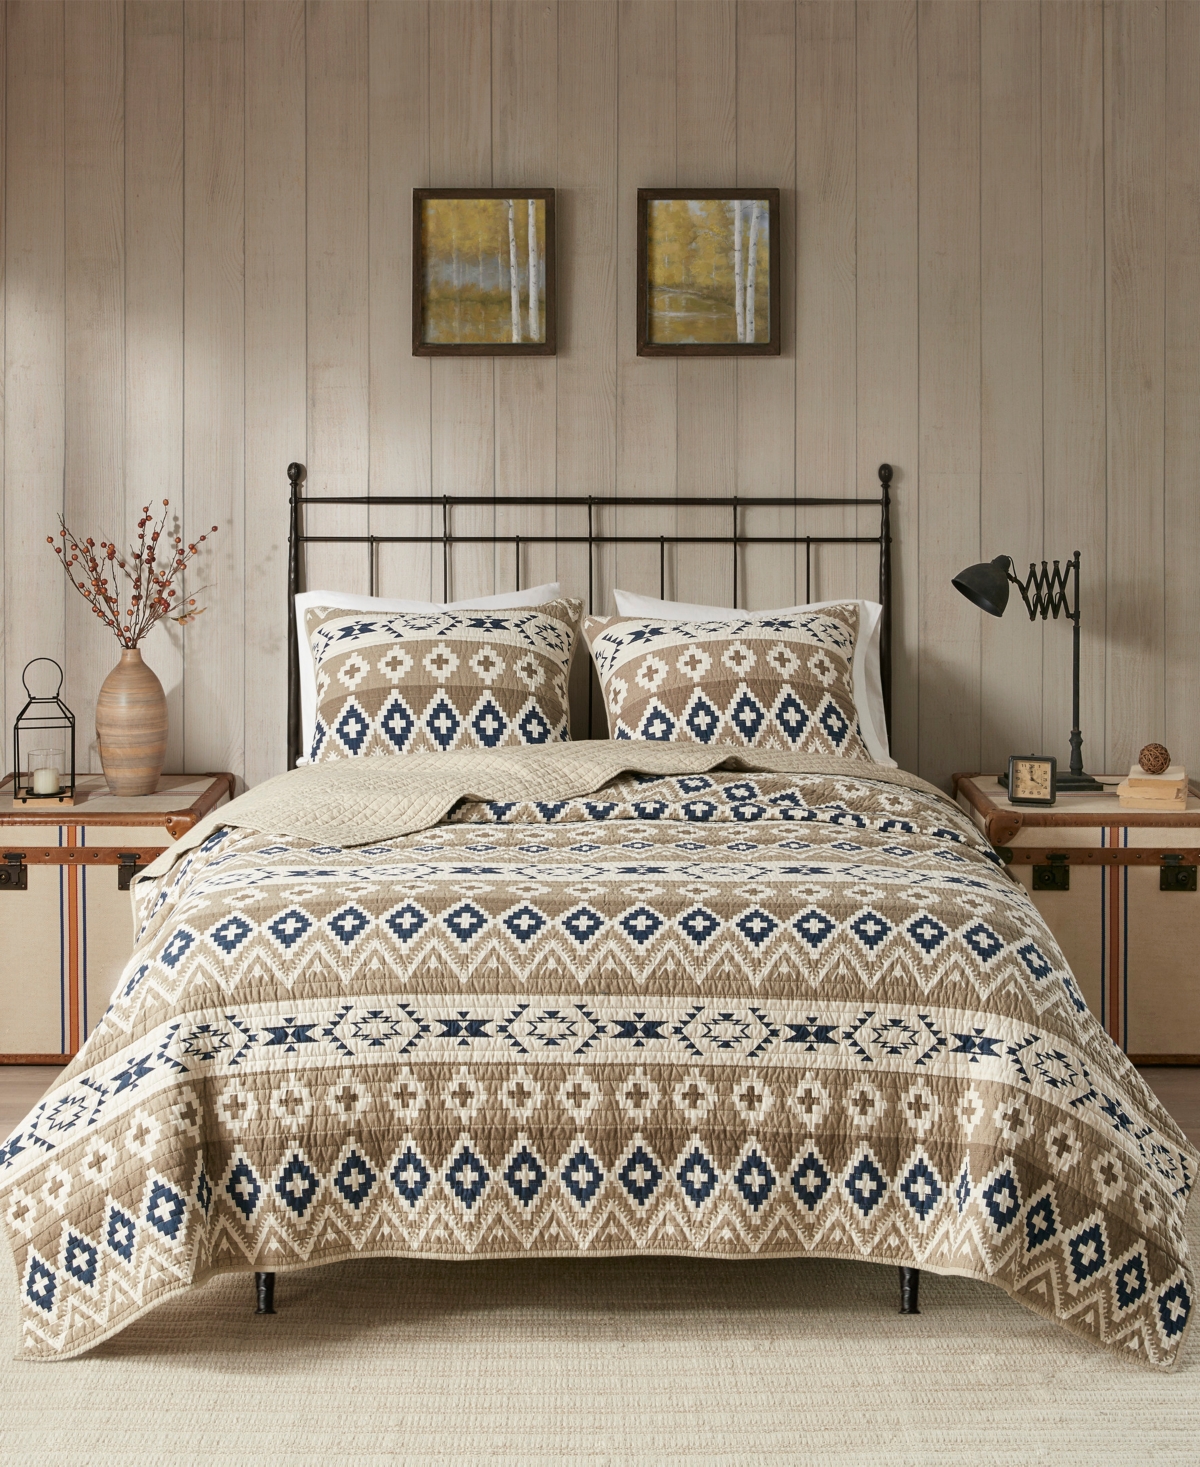 Woolrich Montana Printed Cotton Oversized 3 Piece Quilt Mini Set, King/california King In Tan